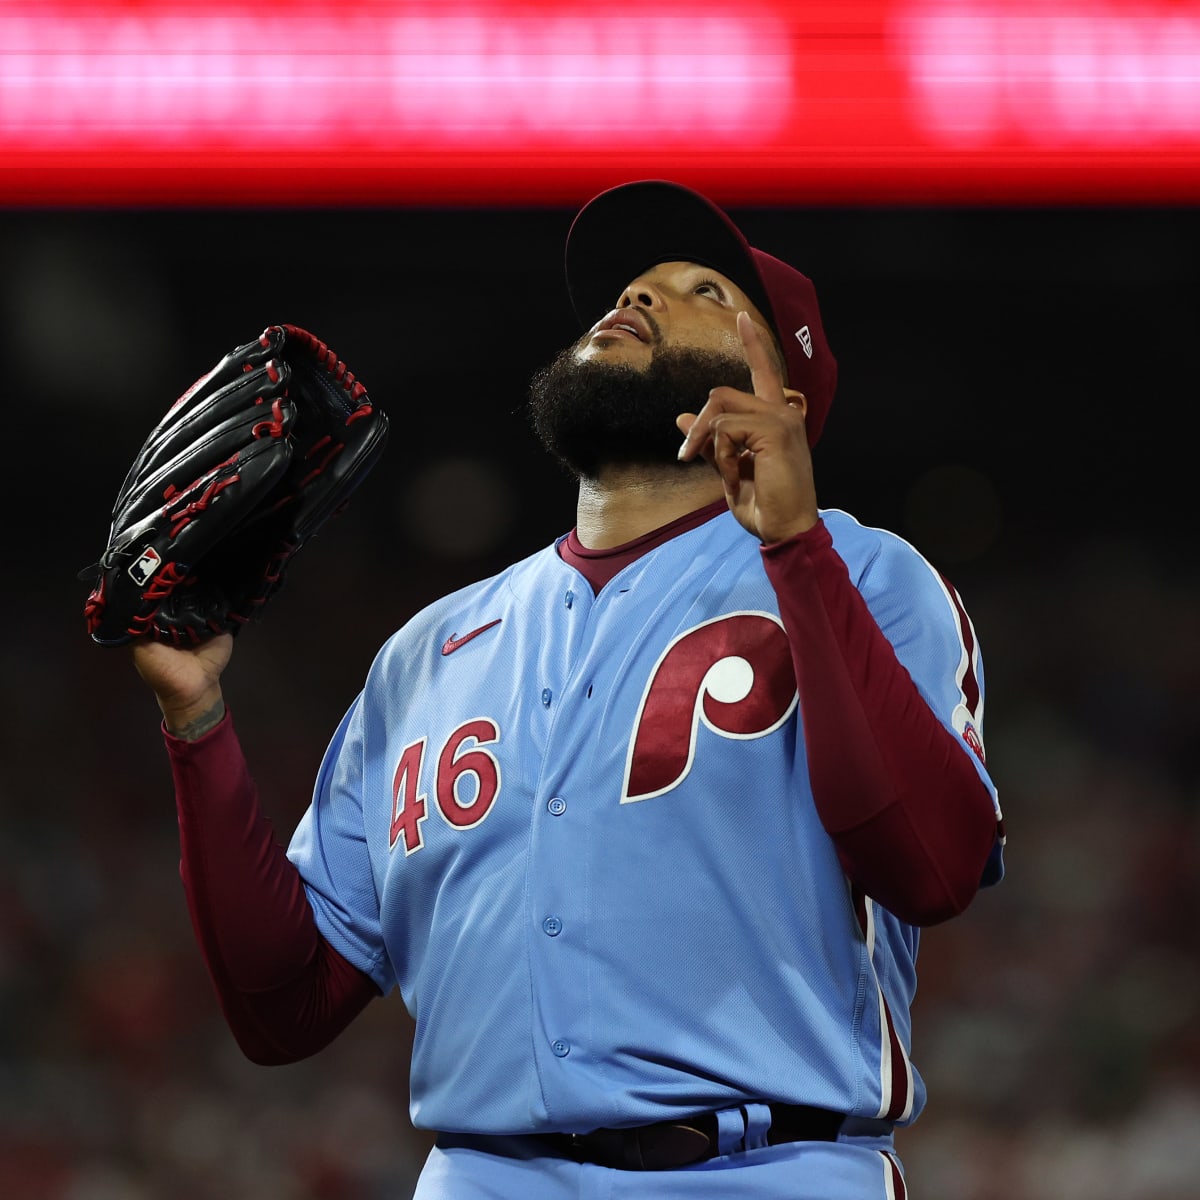 Phillies notes: Quinn moves rehab to Triple-A, could join Phils soon